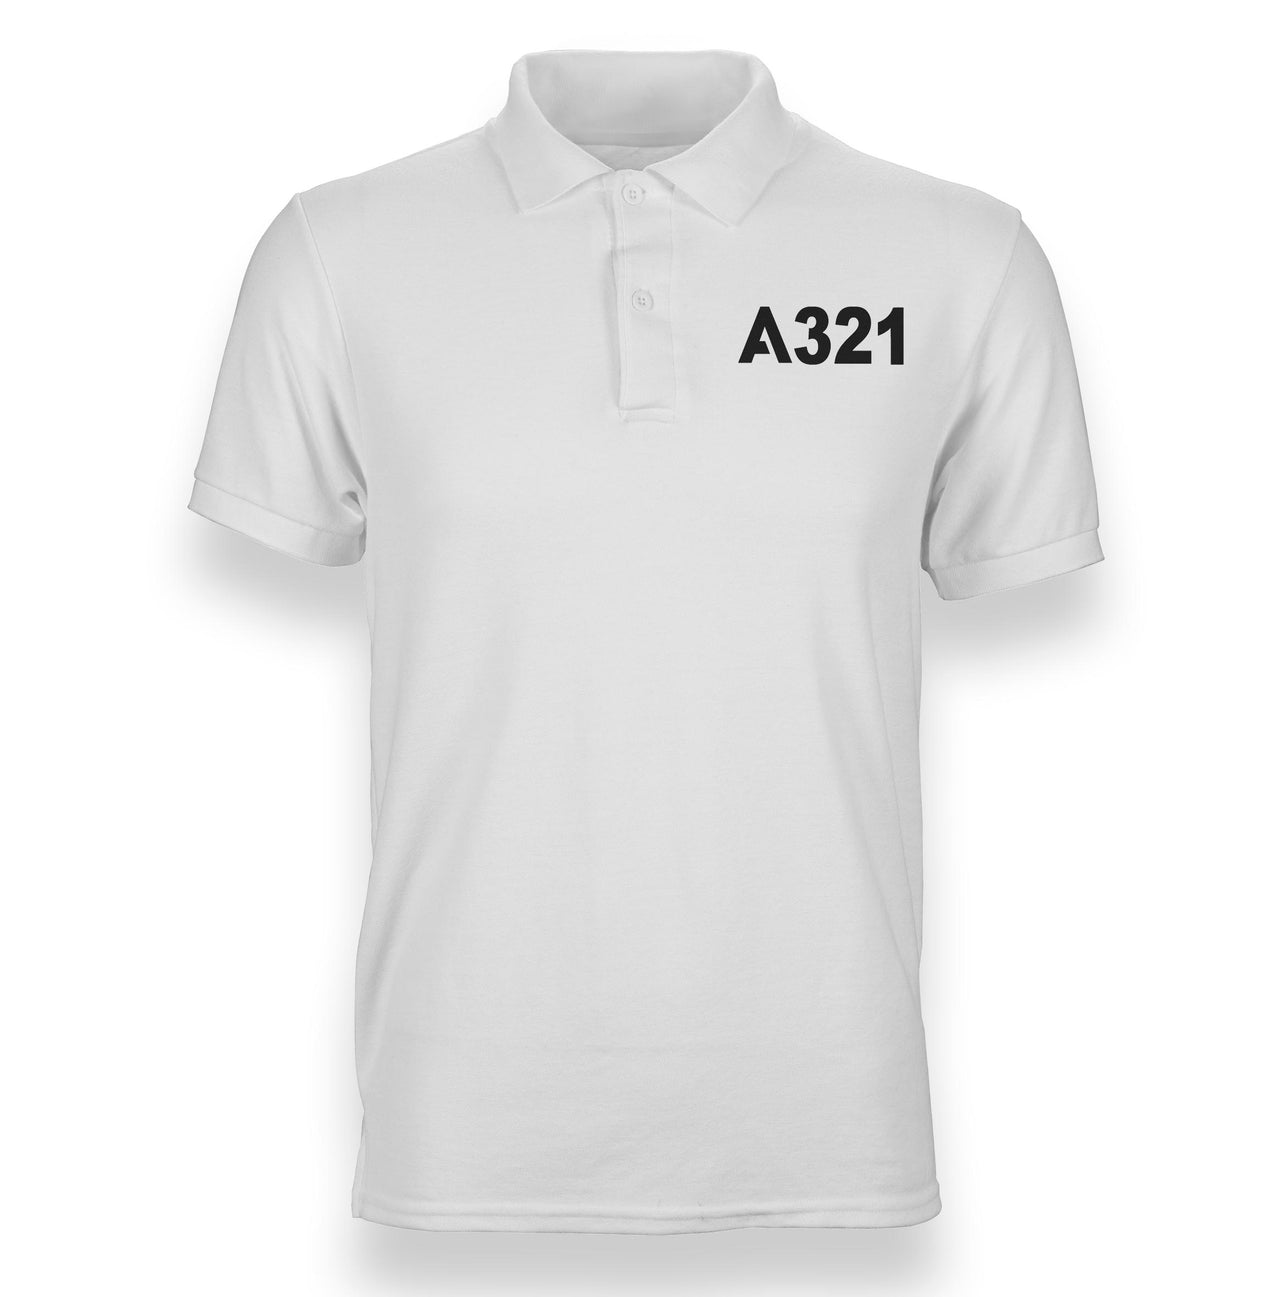 A321 Flat Text Designed Polo T-Shirts